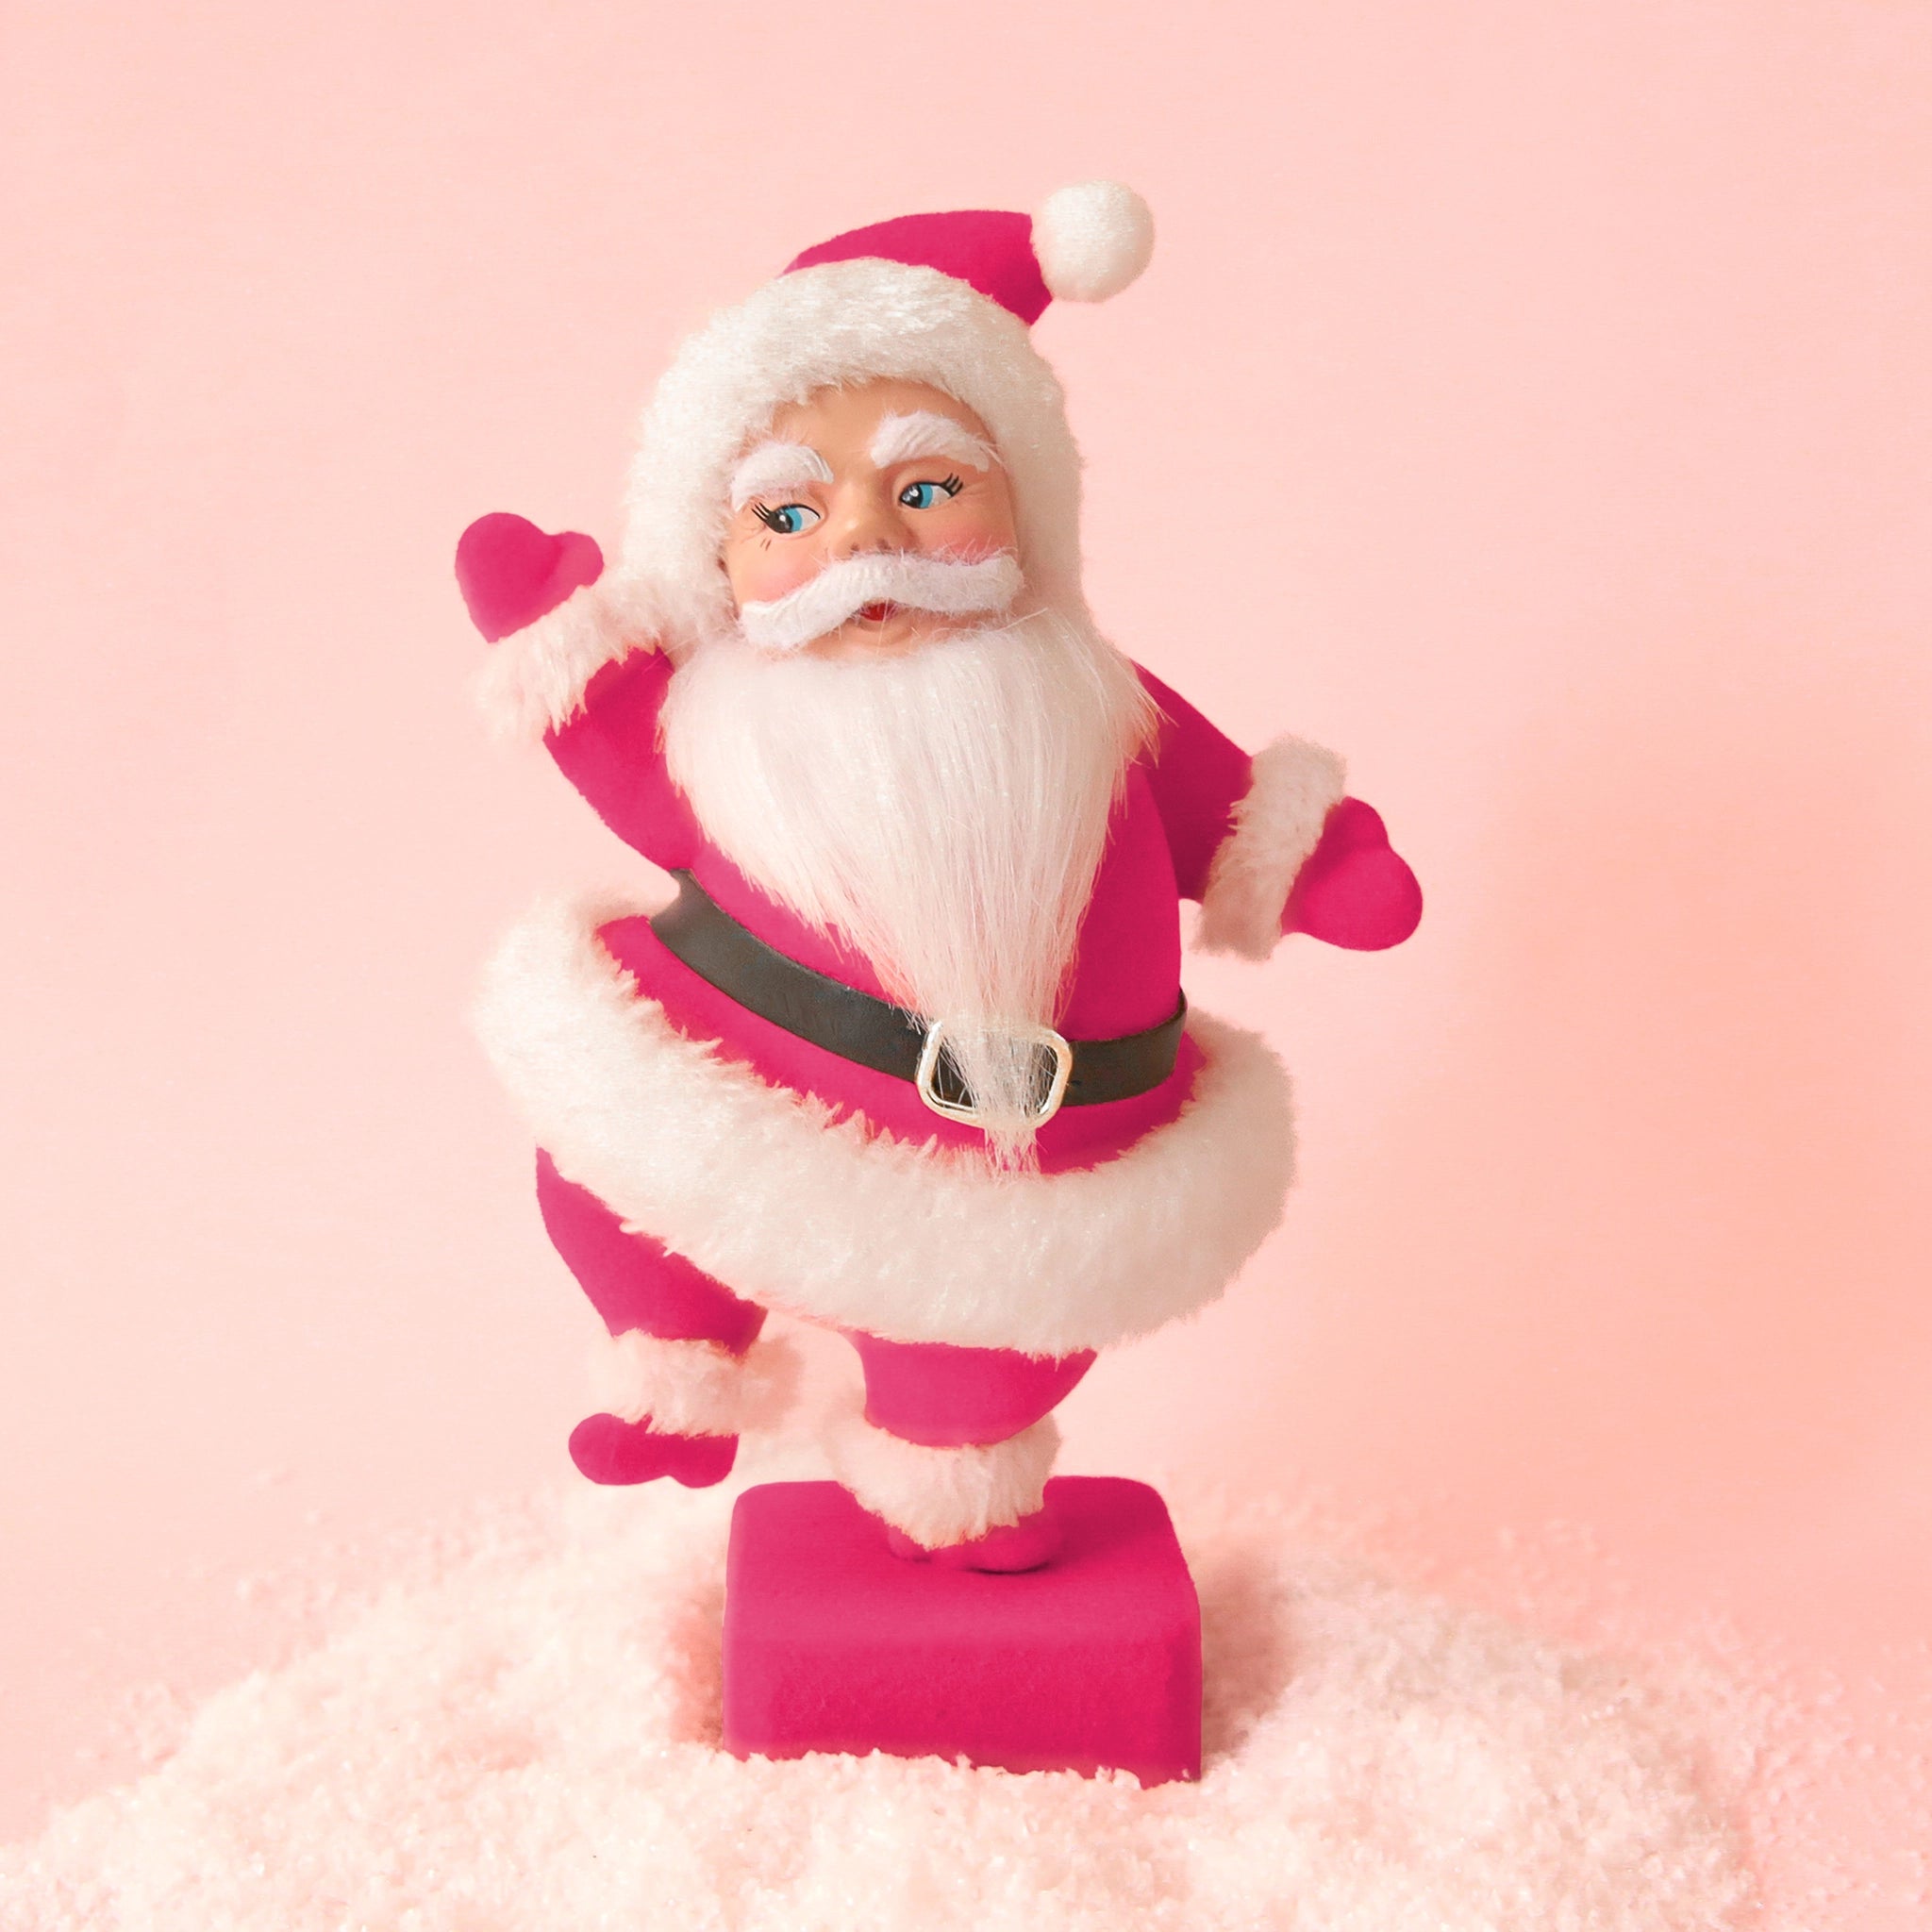 On a peach background is a hot pink flocked Santa shaped figurine holding a dancing pose. 